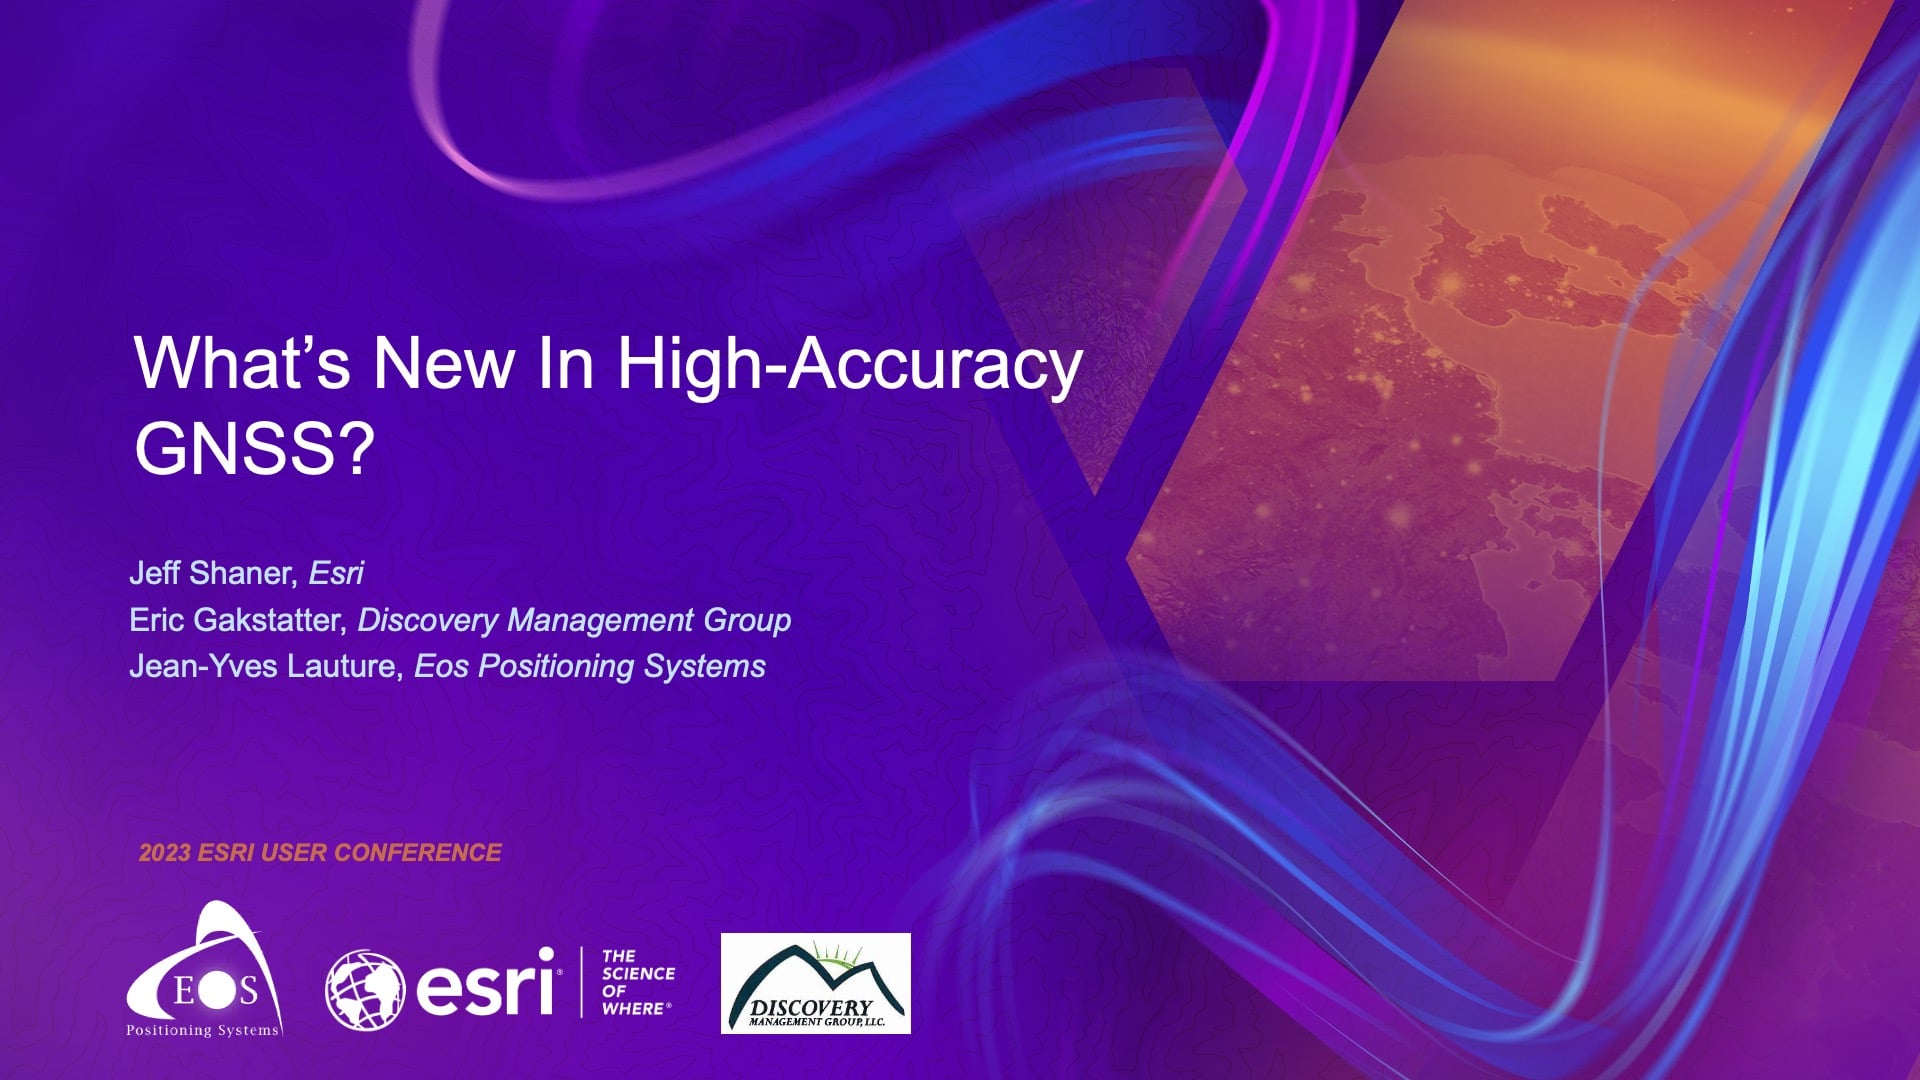 What’s New in High-Accuracy GNSS?